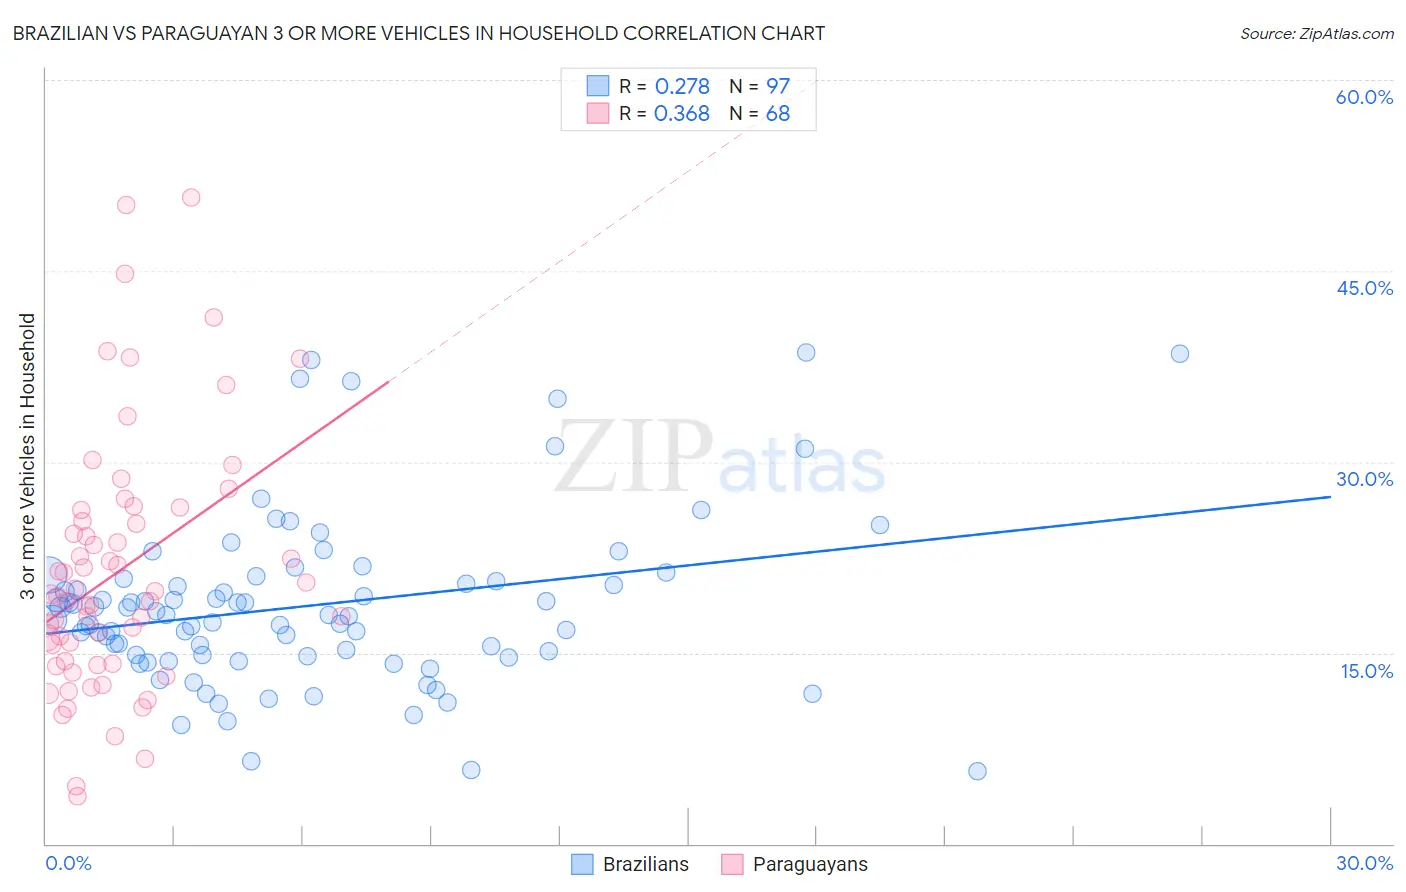 Brazilian vs Paraguayan 3 or more Vehicles in Household